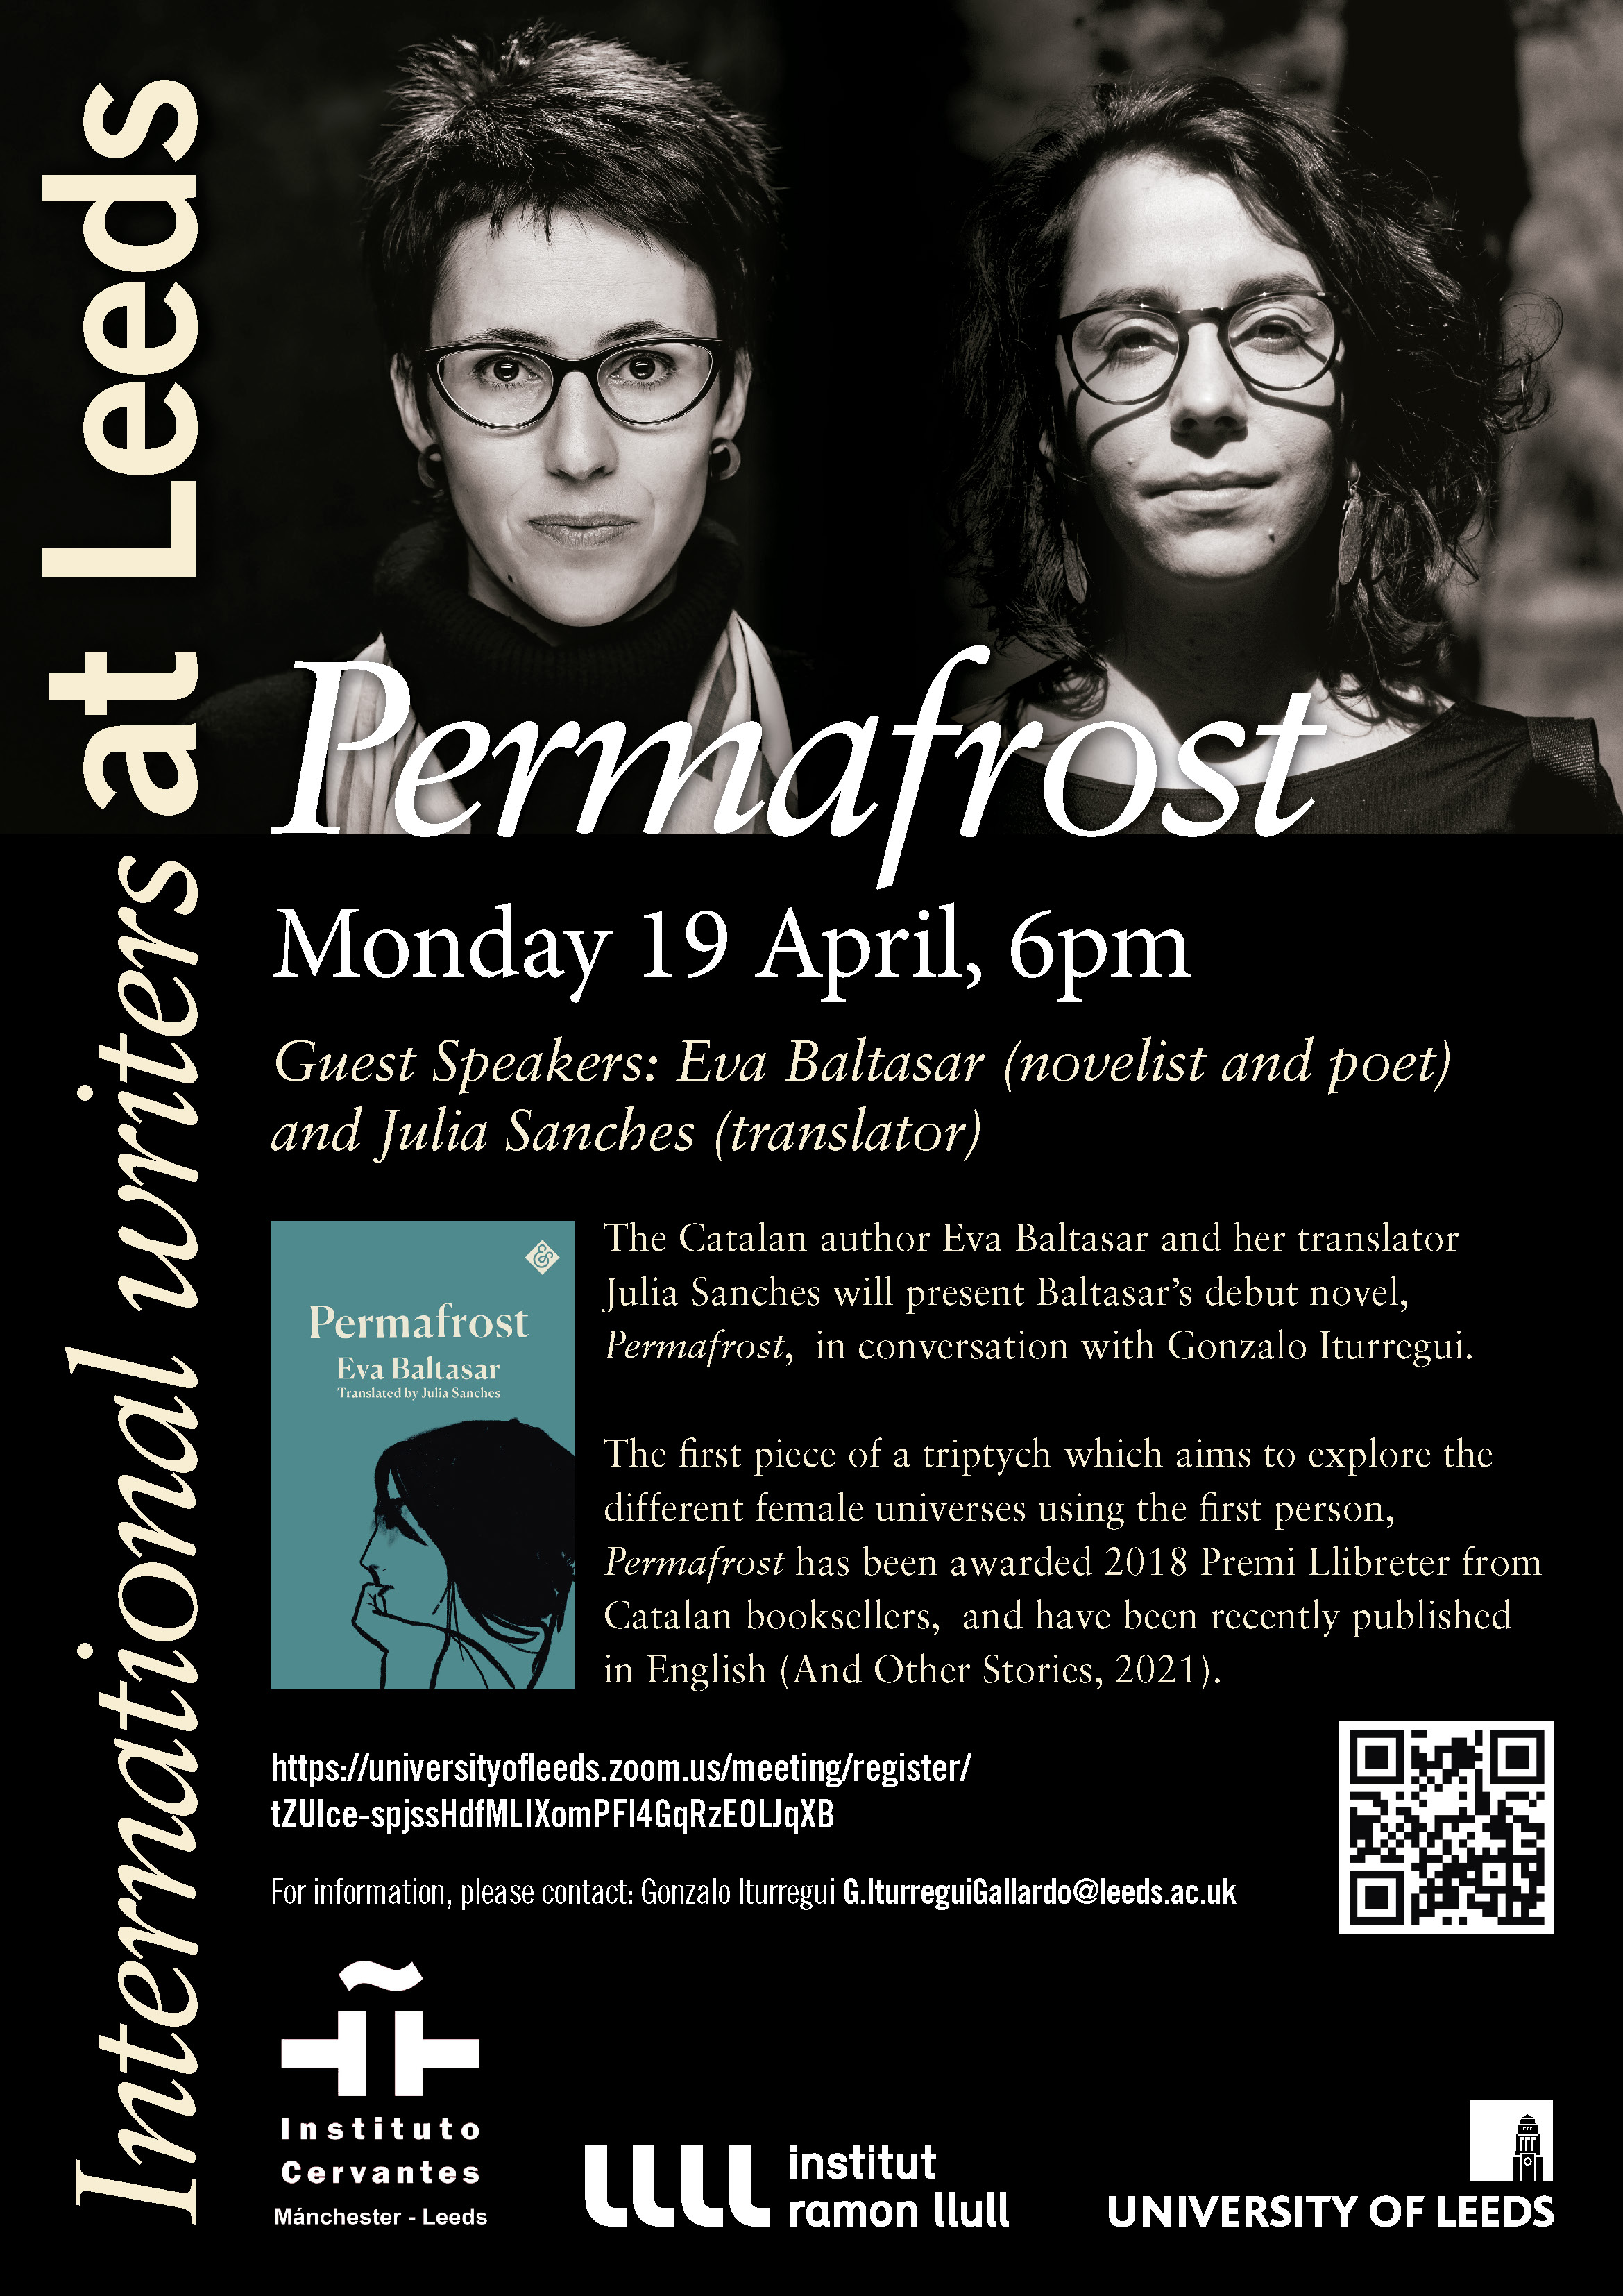 Launching of Permafrost. Eva Baltasar and Julia Sanches in conversation